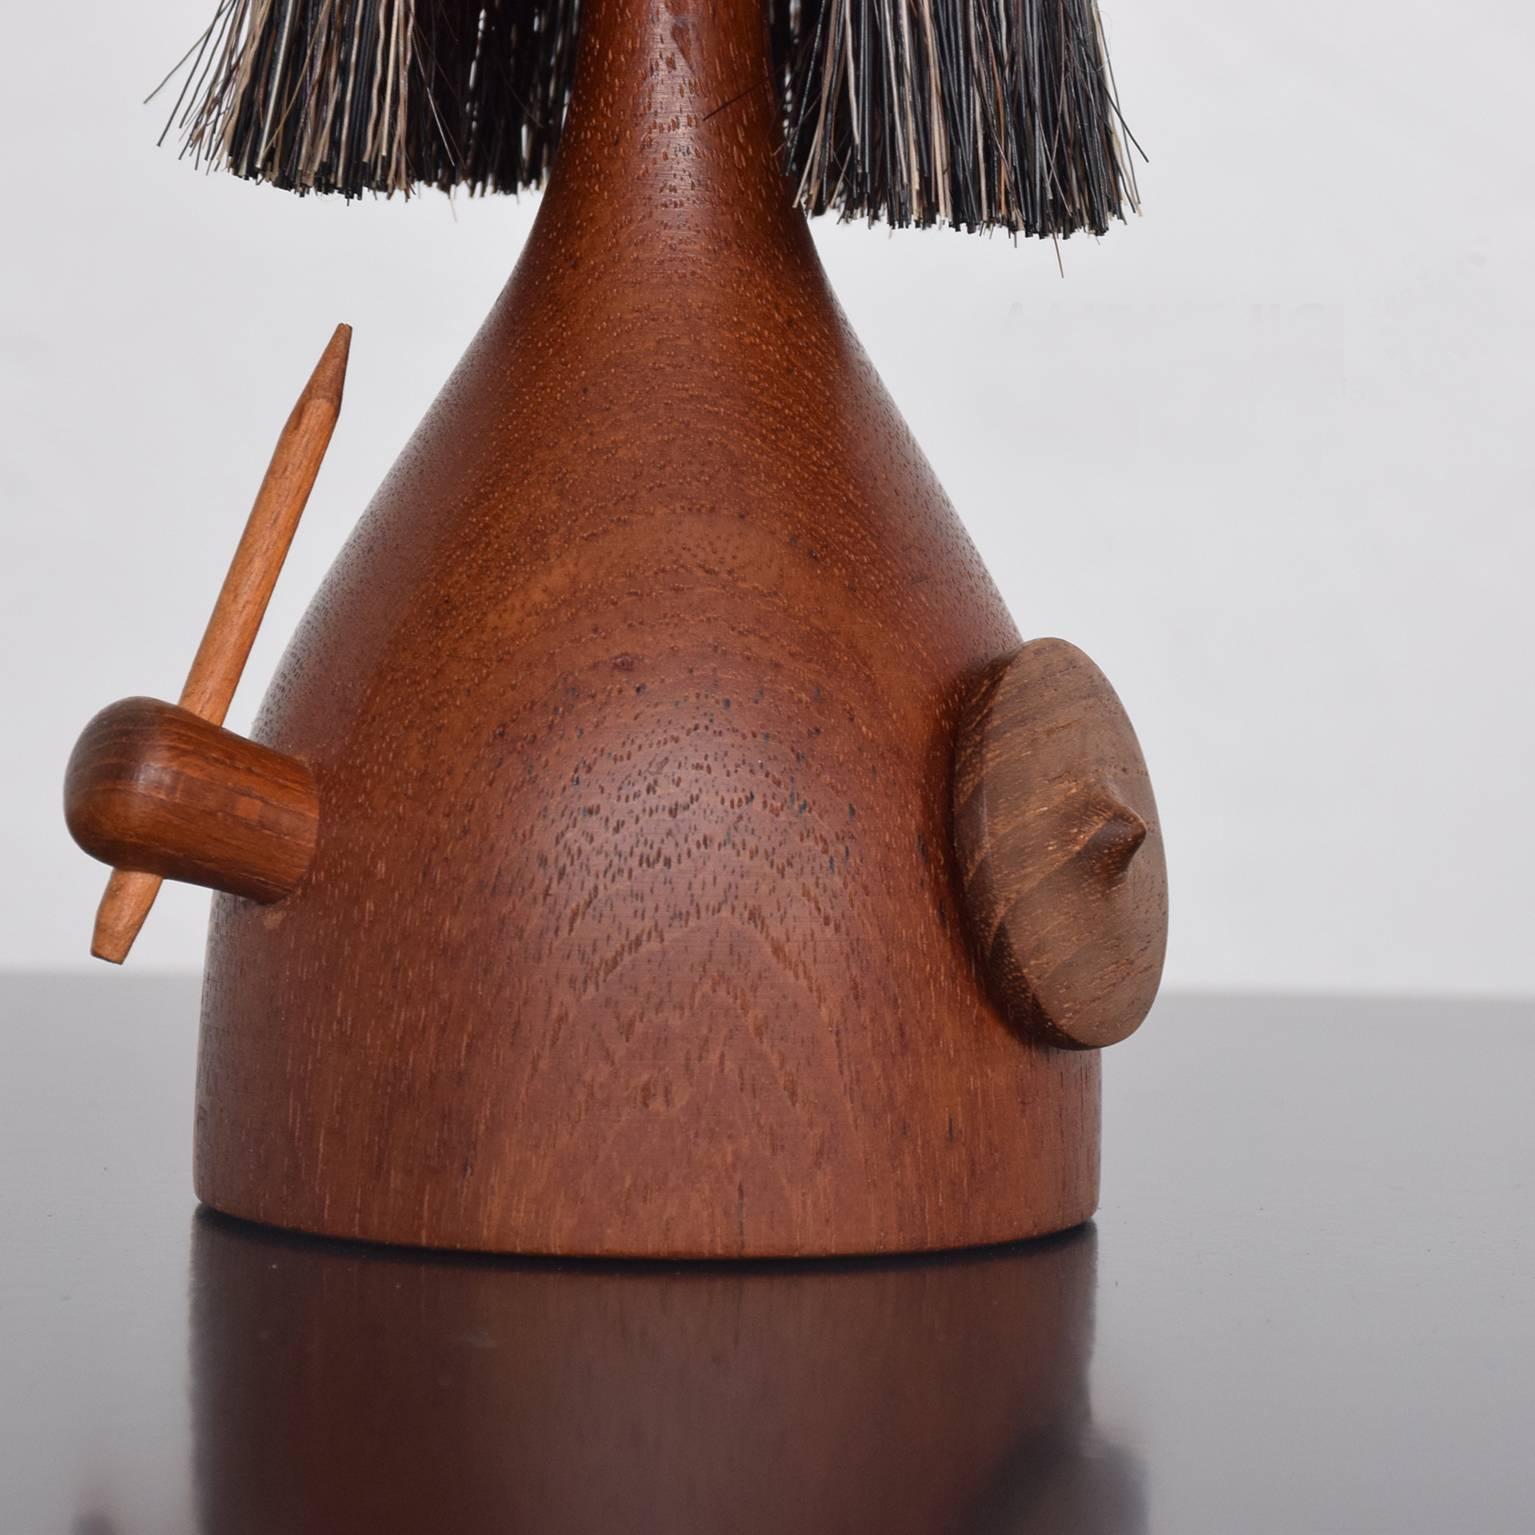 For your consideration a vintage Danish toy. Viking shape. The head can be removed and used as a brush.
Stamped underneath with makers label: 